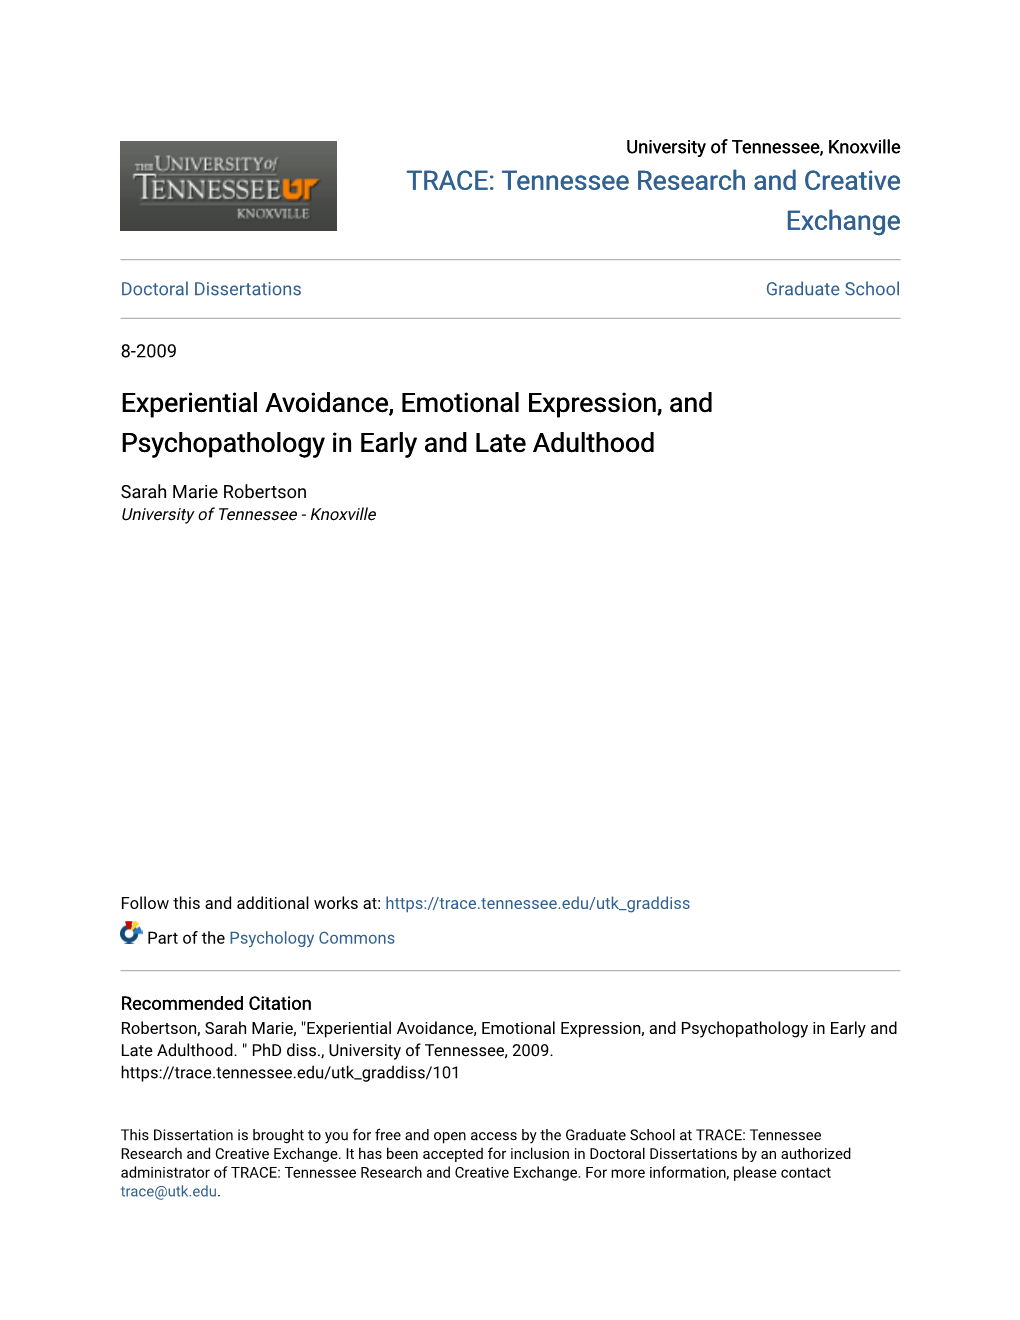 Experiential Avoidance, Emotional Expression, and Psychopathology in Early and Late Adulthood